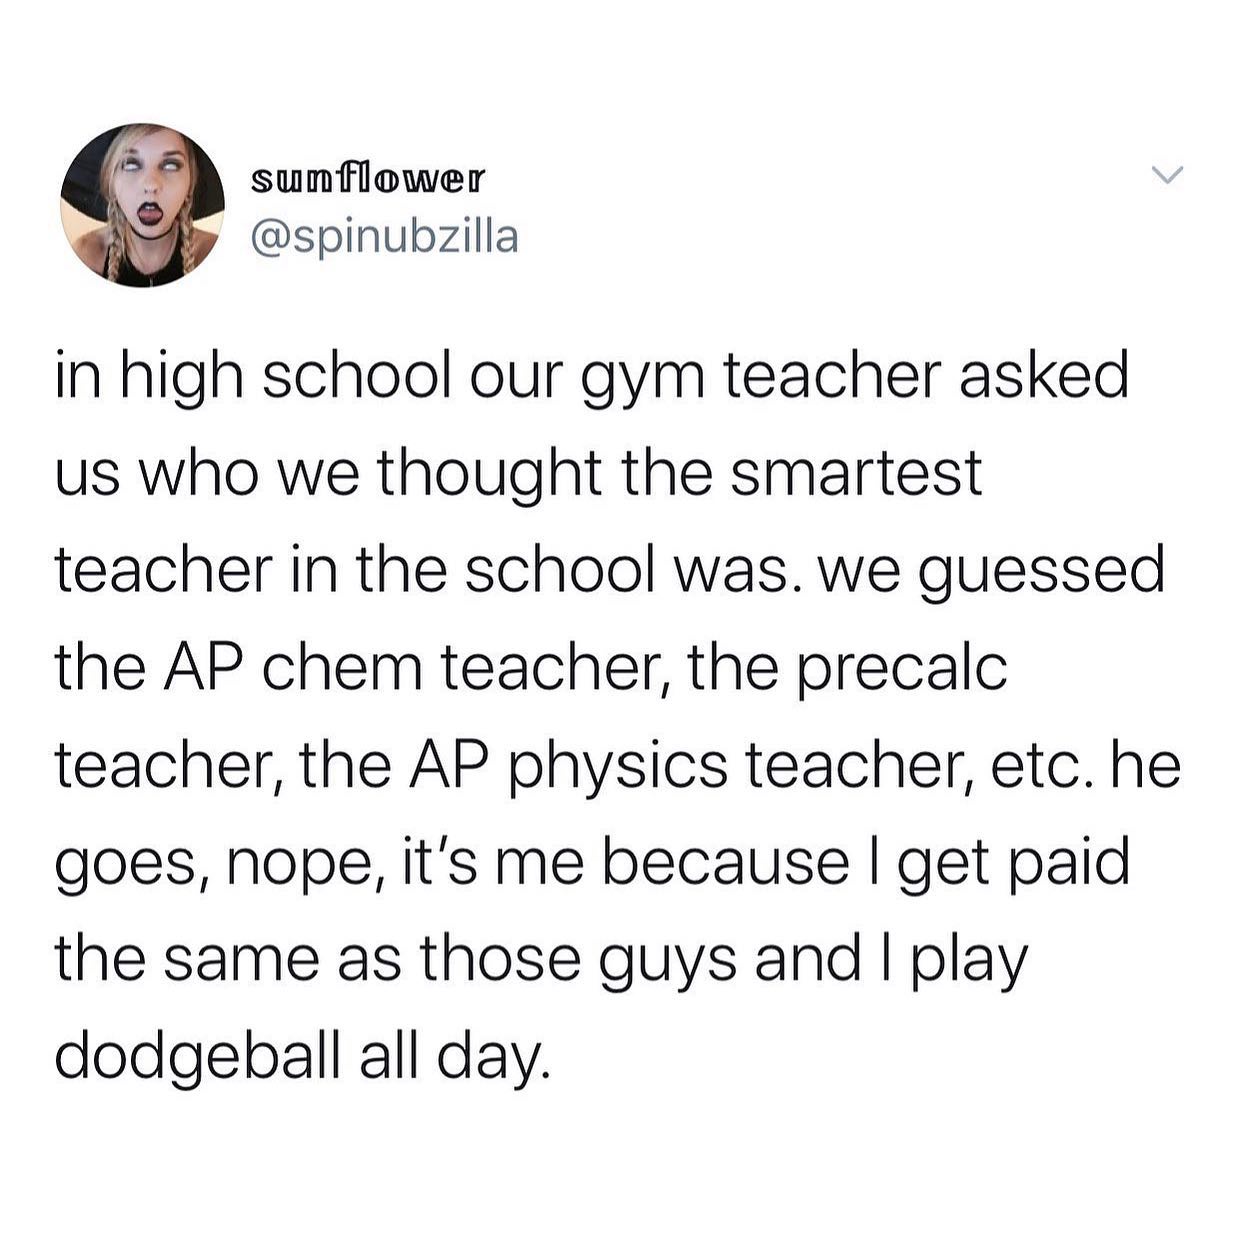 dank memes - twitter - angle - sunflower in high school our gym teacher asked us who we thought the smartest teacher in the school was. we guessed the Ap chem teacher, the precalc teacher, the Ap physics teacher, etc. he goes, nope, it's me because I get 